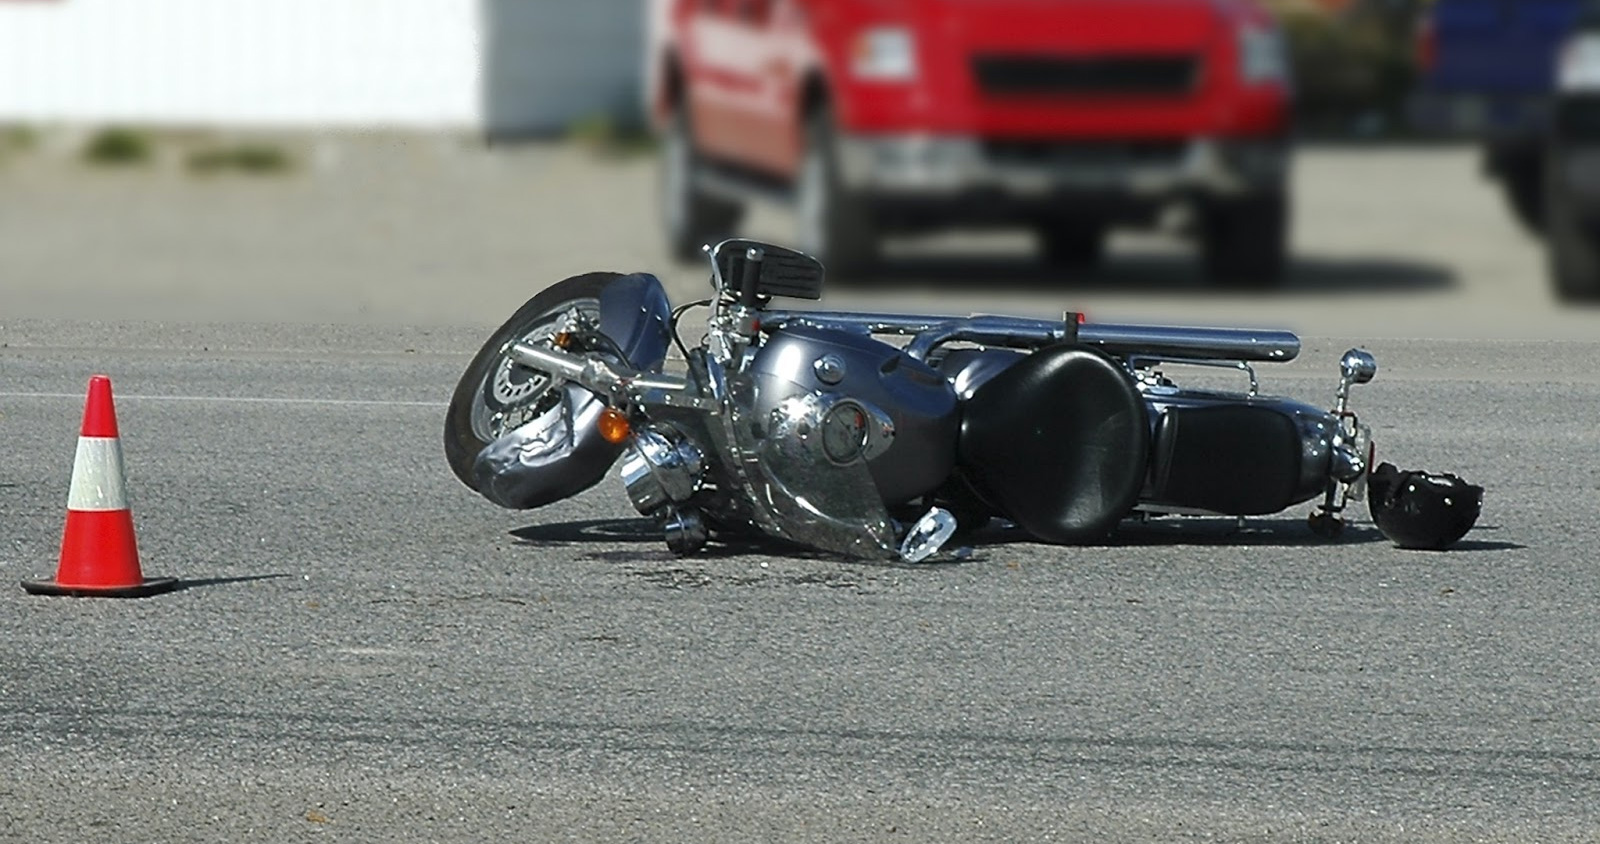 Motorcycle Accident Attorney in Conroe, TX